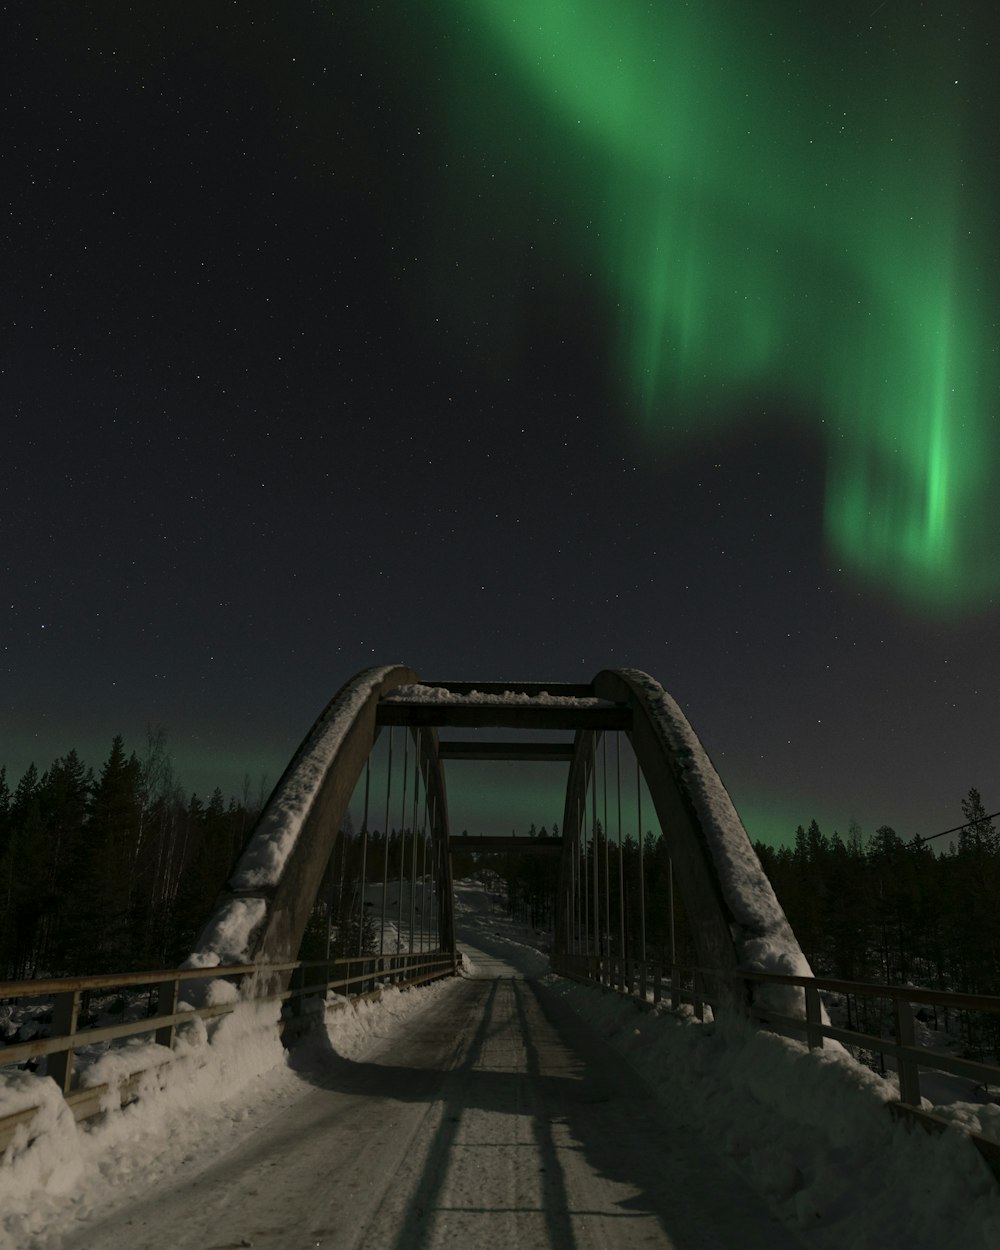 a bridge with snow on the ground and a green light in the sky